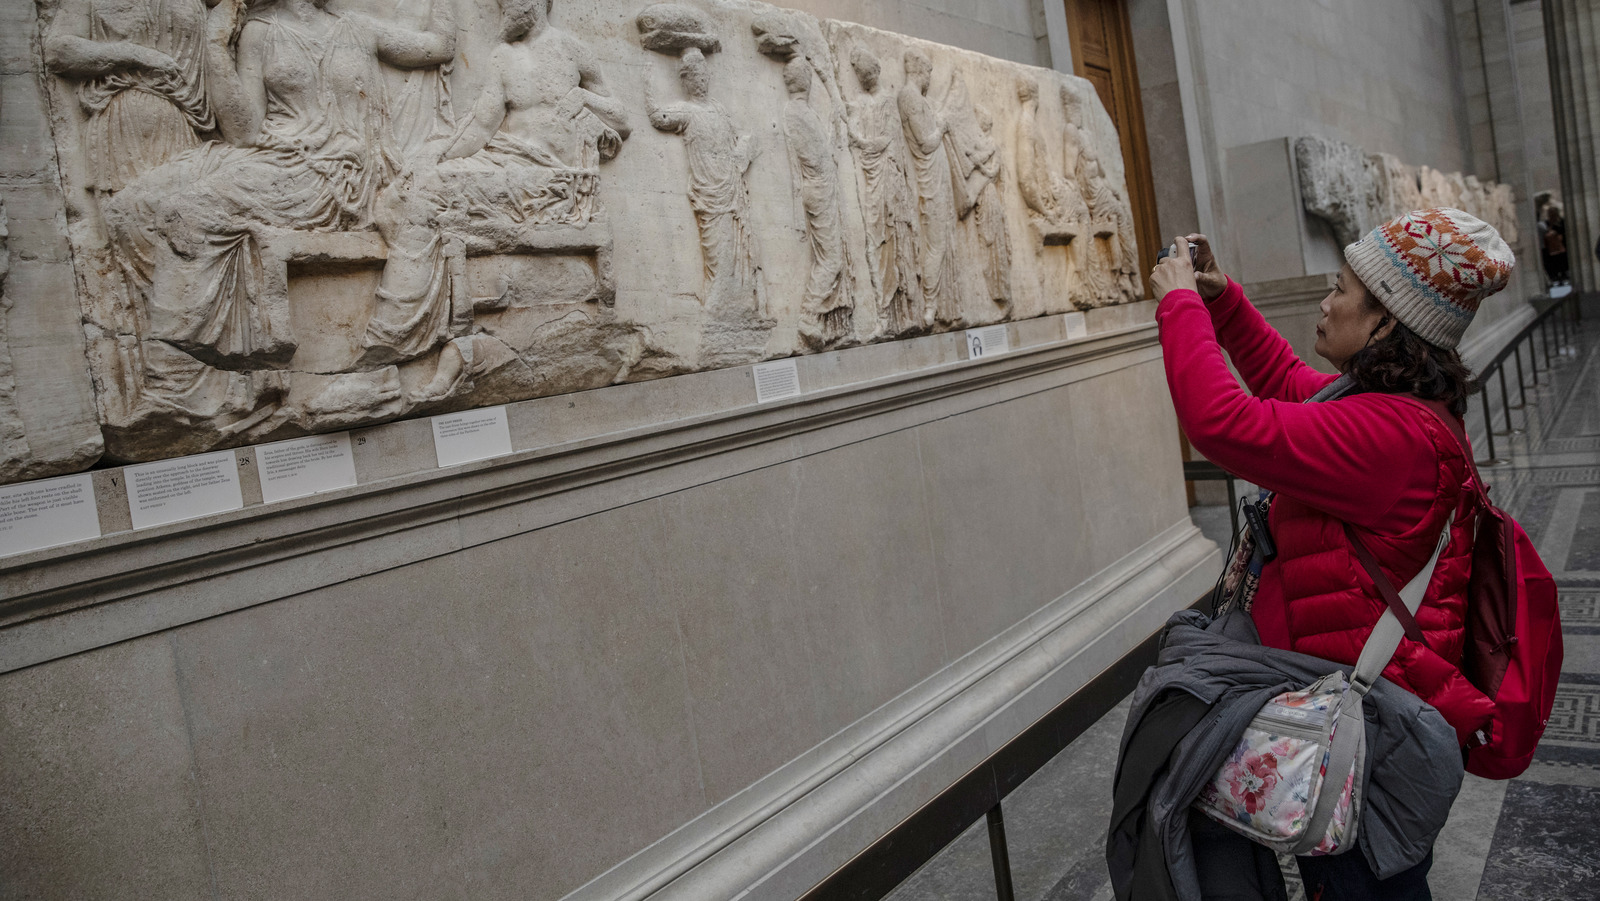 Looting Matters: Parthenon marbles: British Prime Minister makes his  position clear